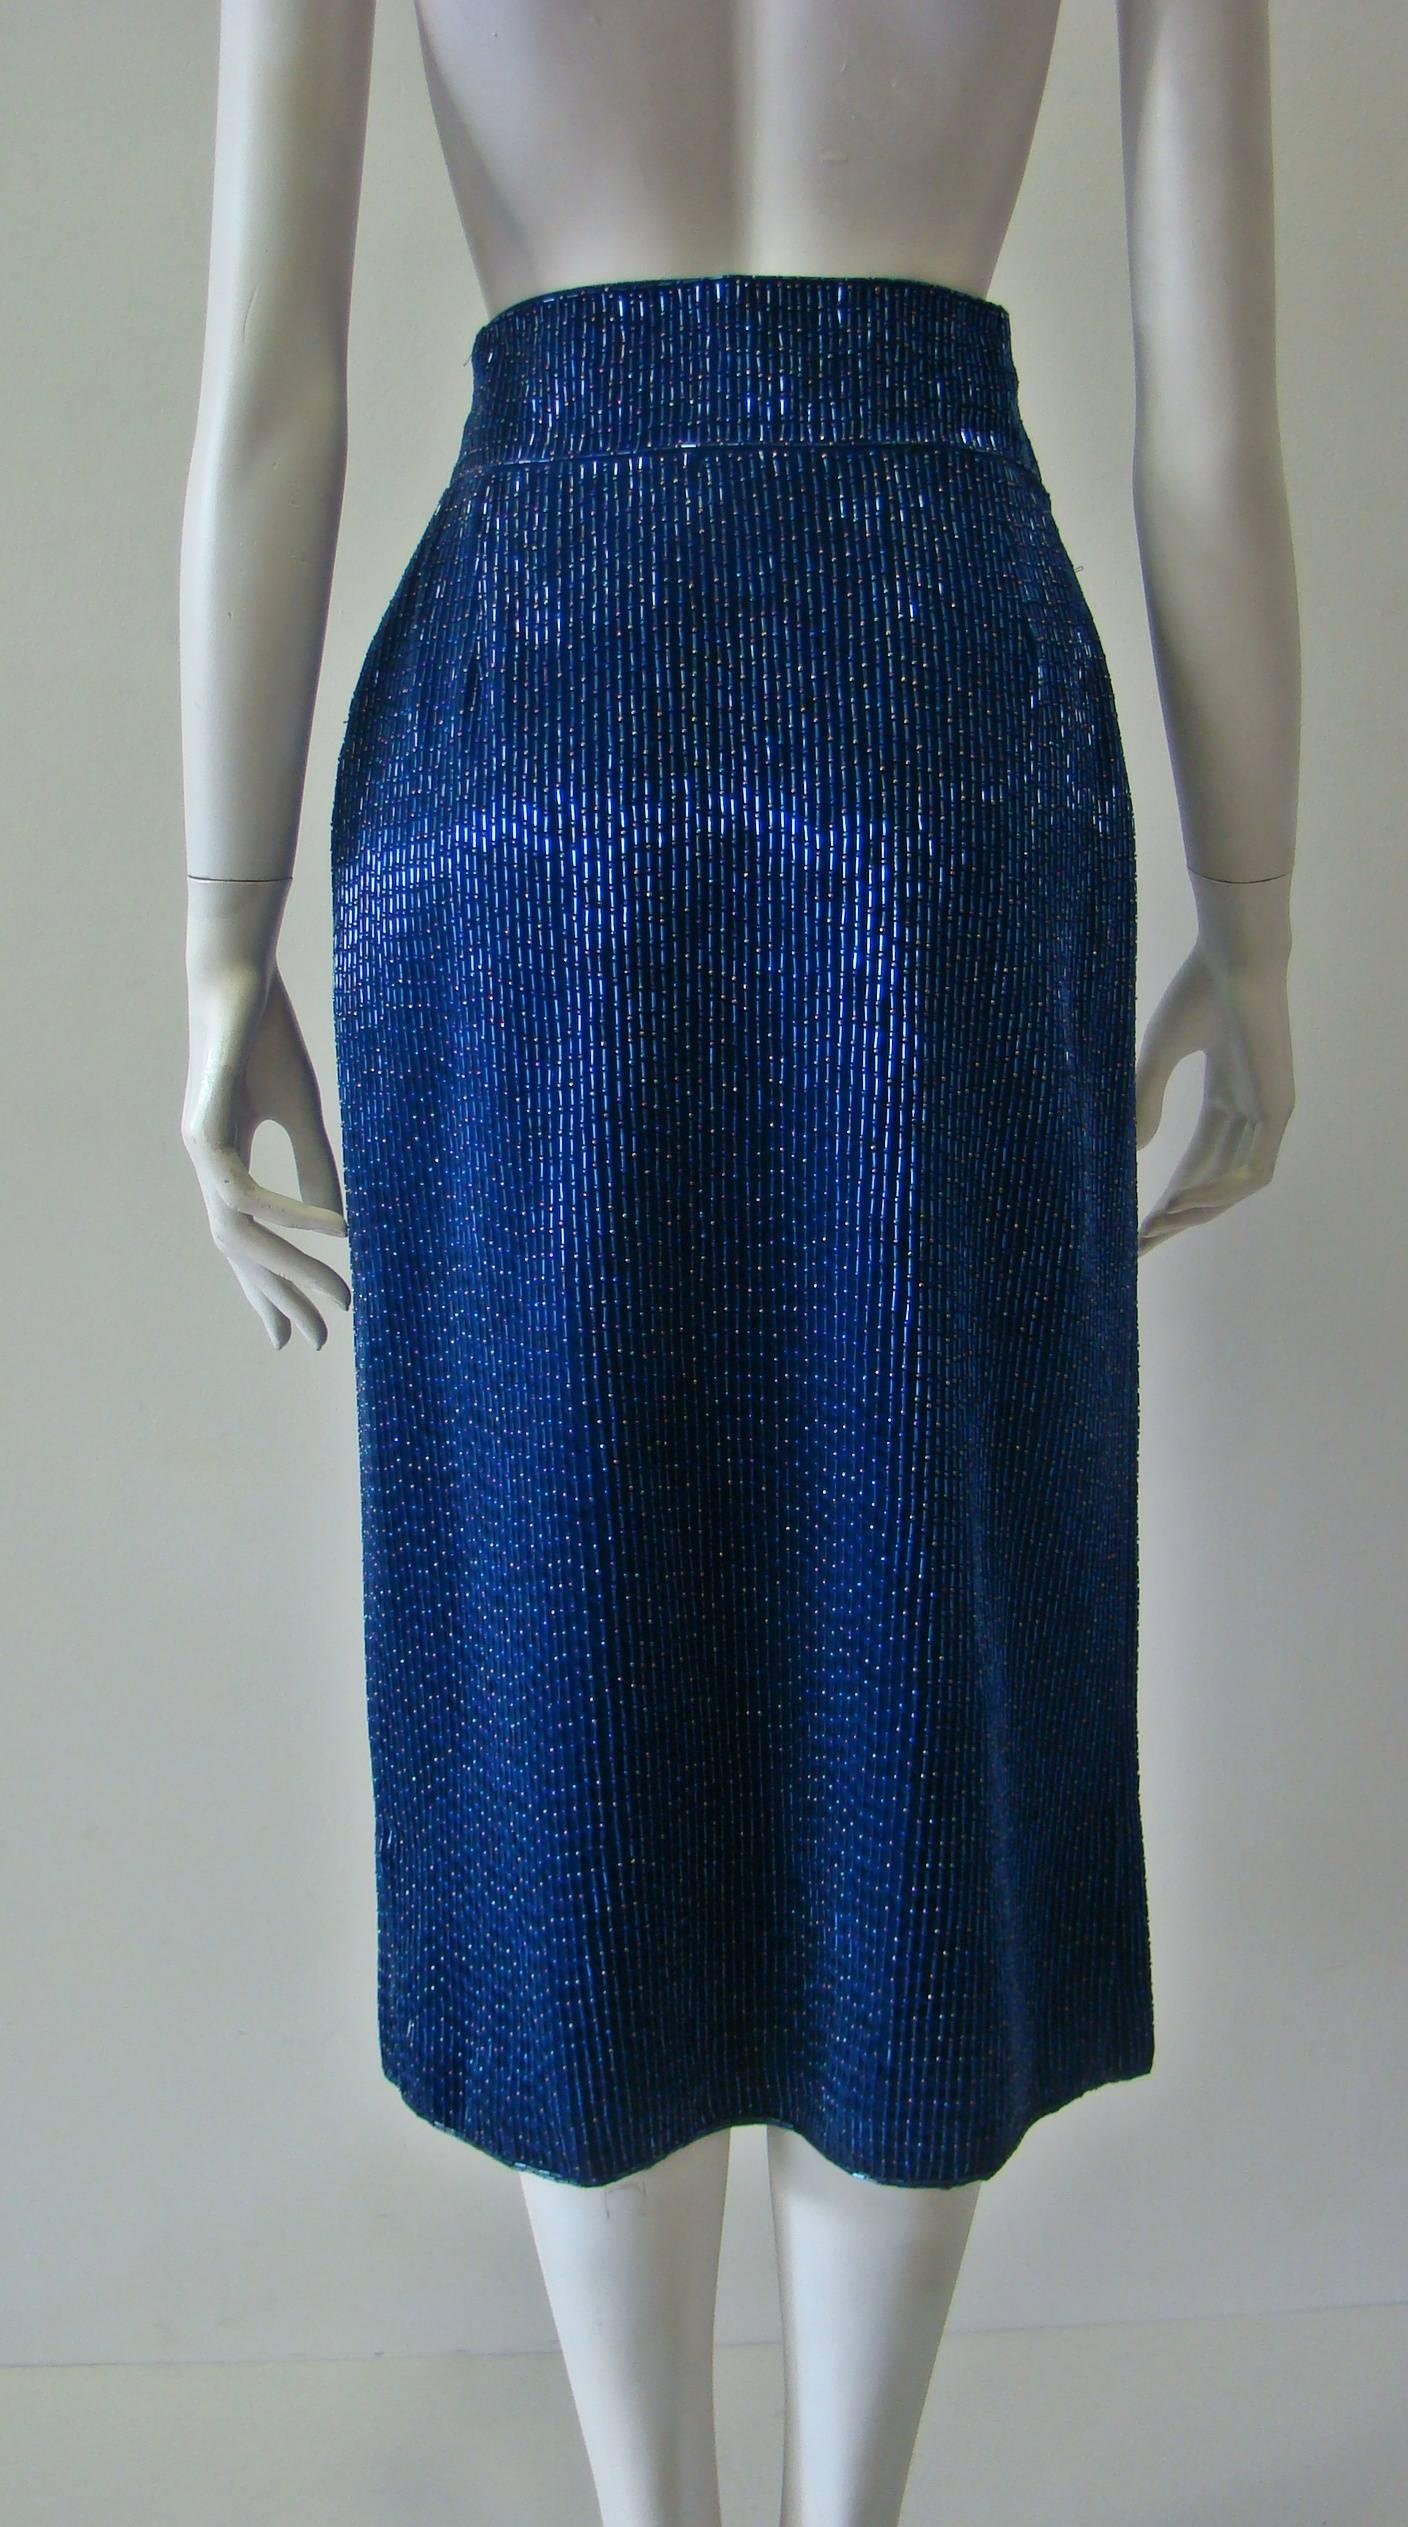 Early Gianni Versace Beaded Evening Skirt Fall 1983 For Sale 1